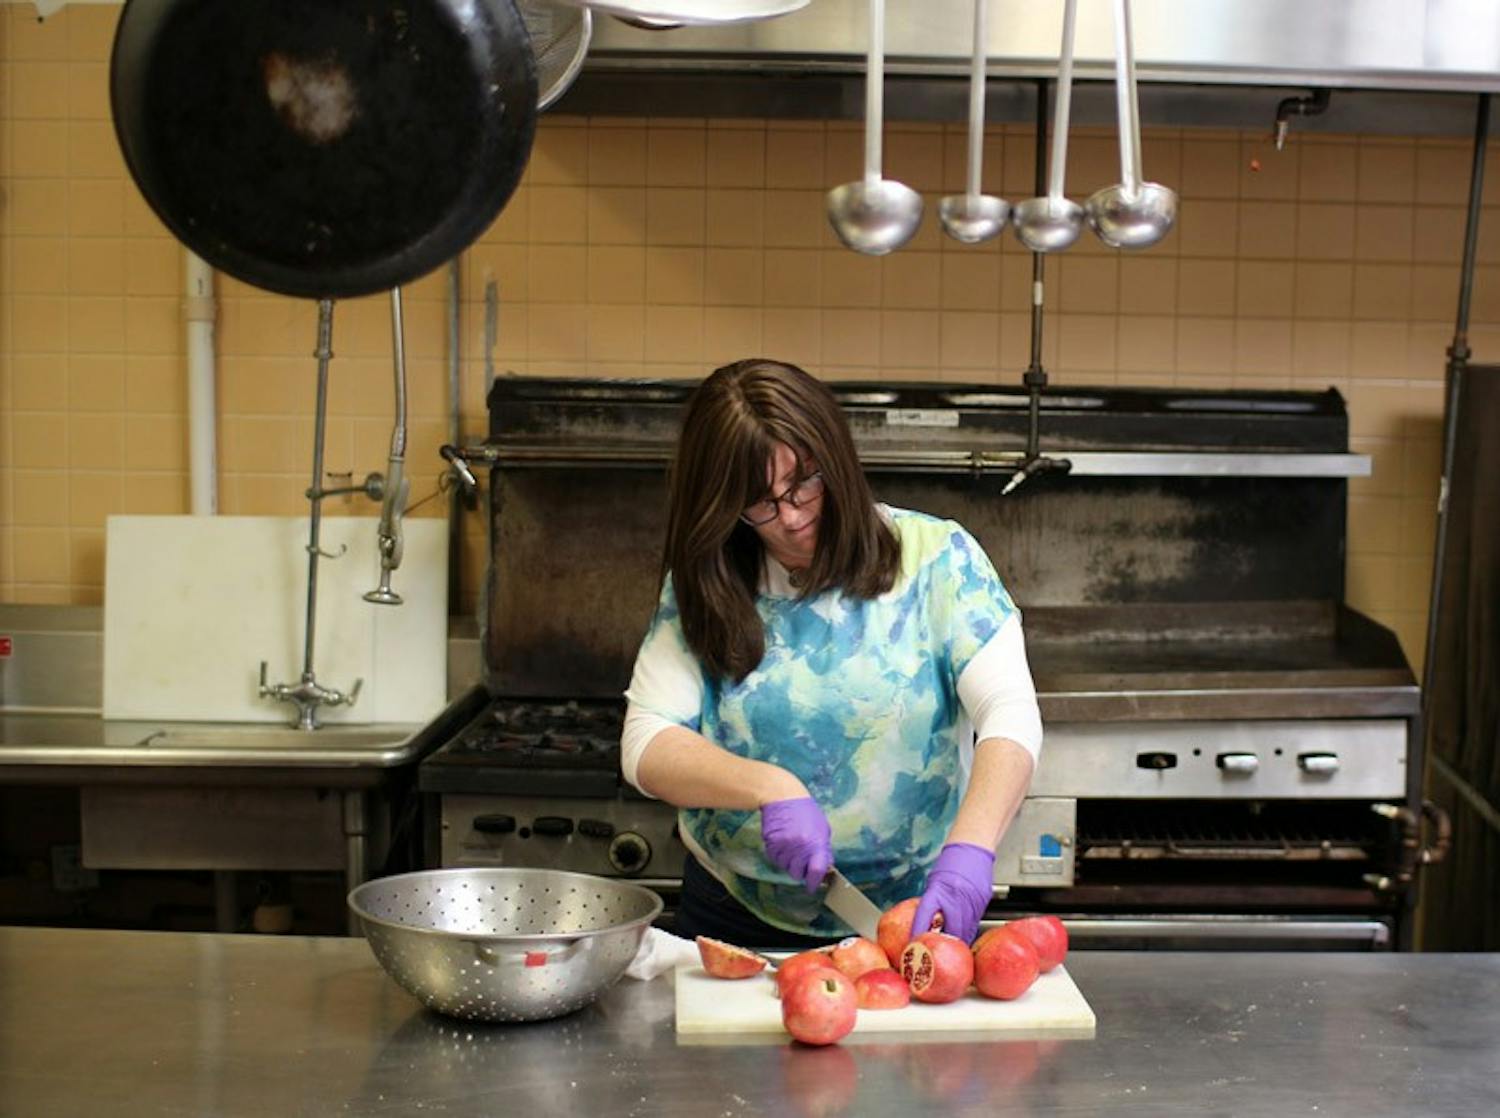 Rivka Gurary, wife of Rabbi Moshe Gurary of The Chabad House of Buffalo, prepares Rosh Hashanah dinner for over 300 expected guests. Rivka and her husband will also be preparing food for some of UB’s Jewish population to come and celebrate the eight-day Jewish holiday of Passover.